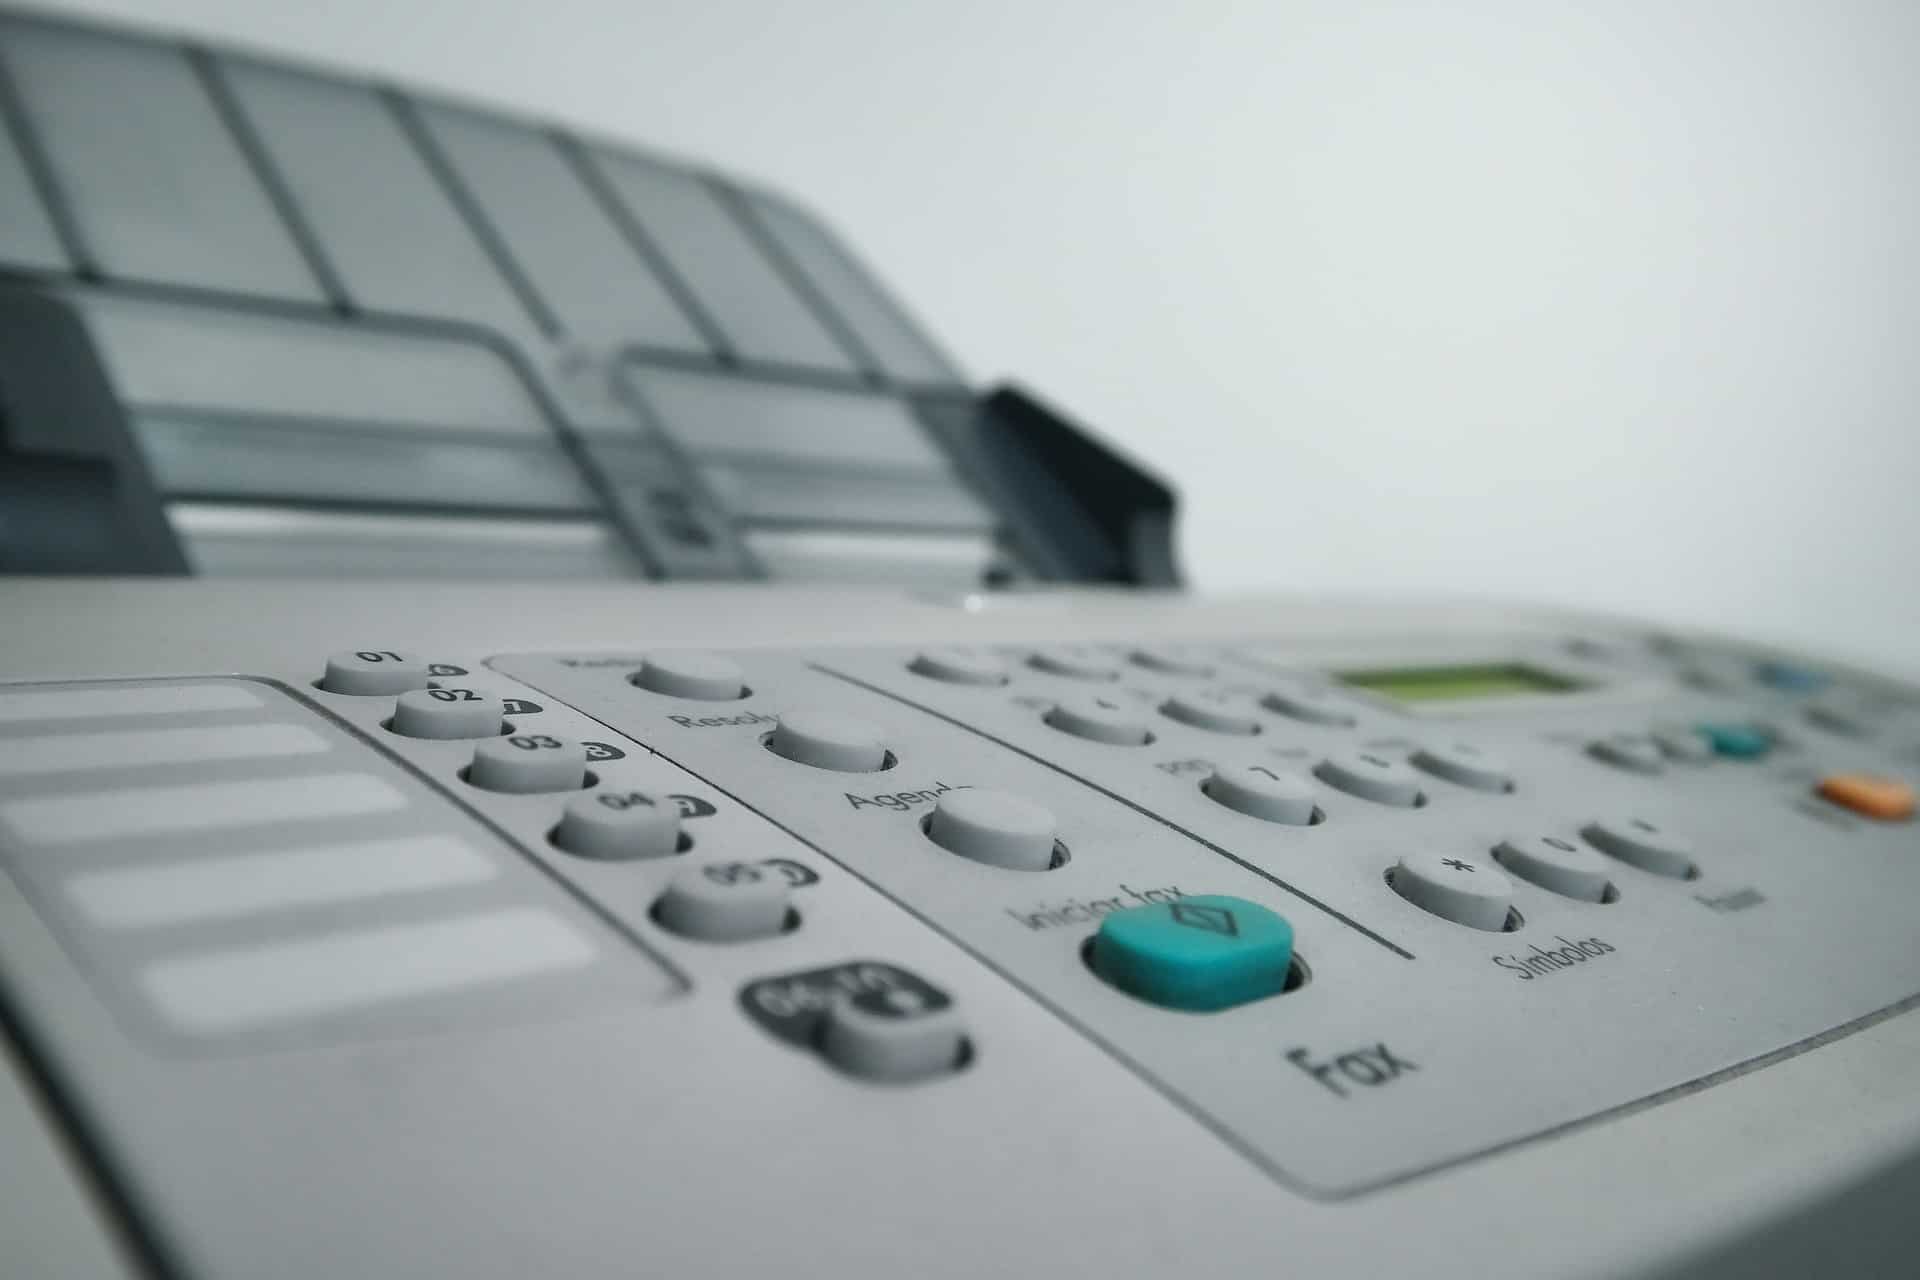 Who uses fax machines anymore? Healthcare does [video]